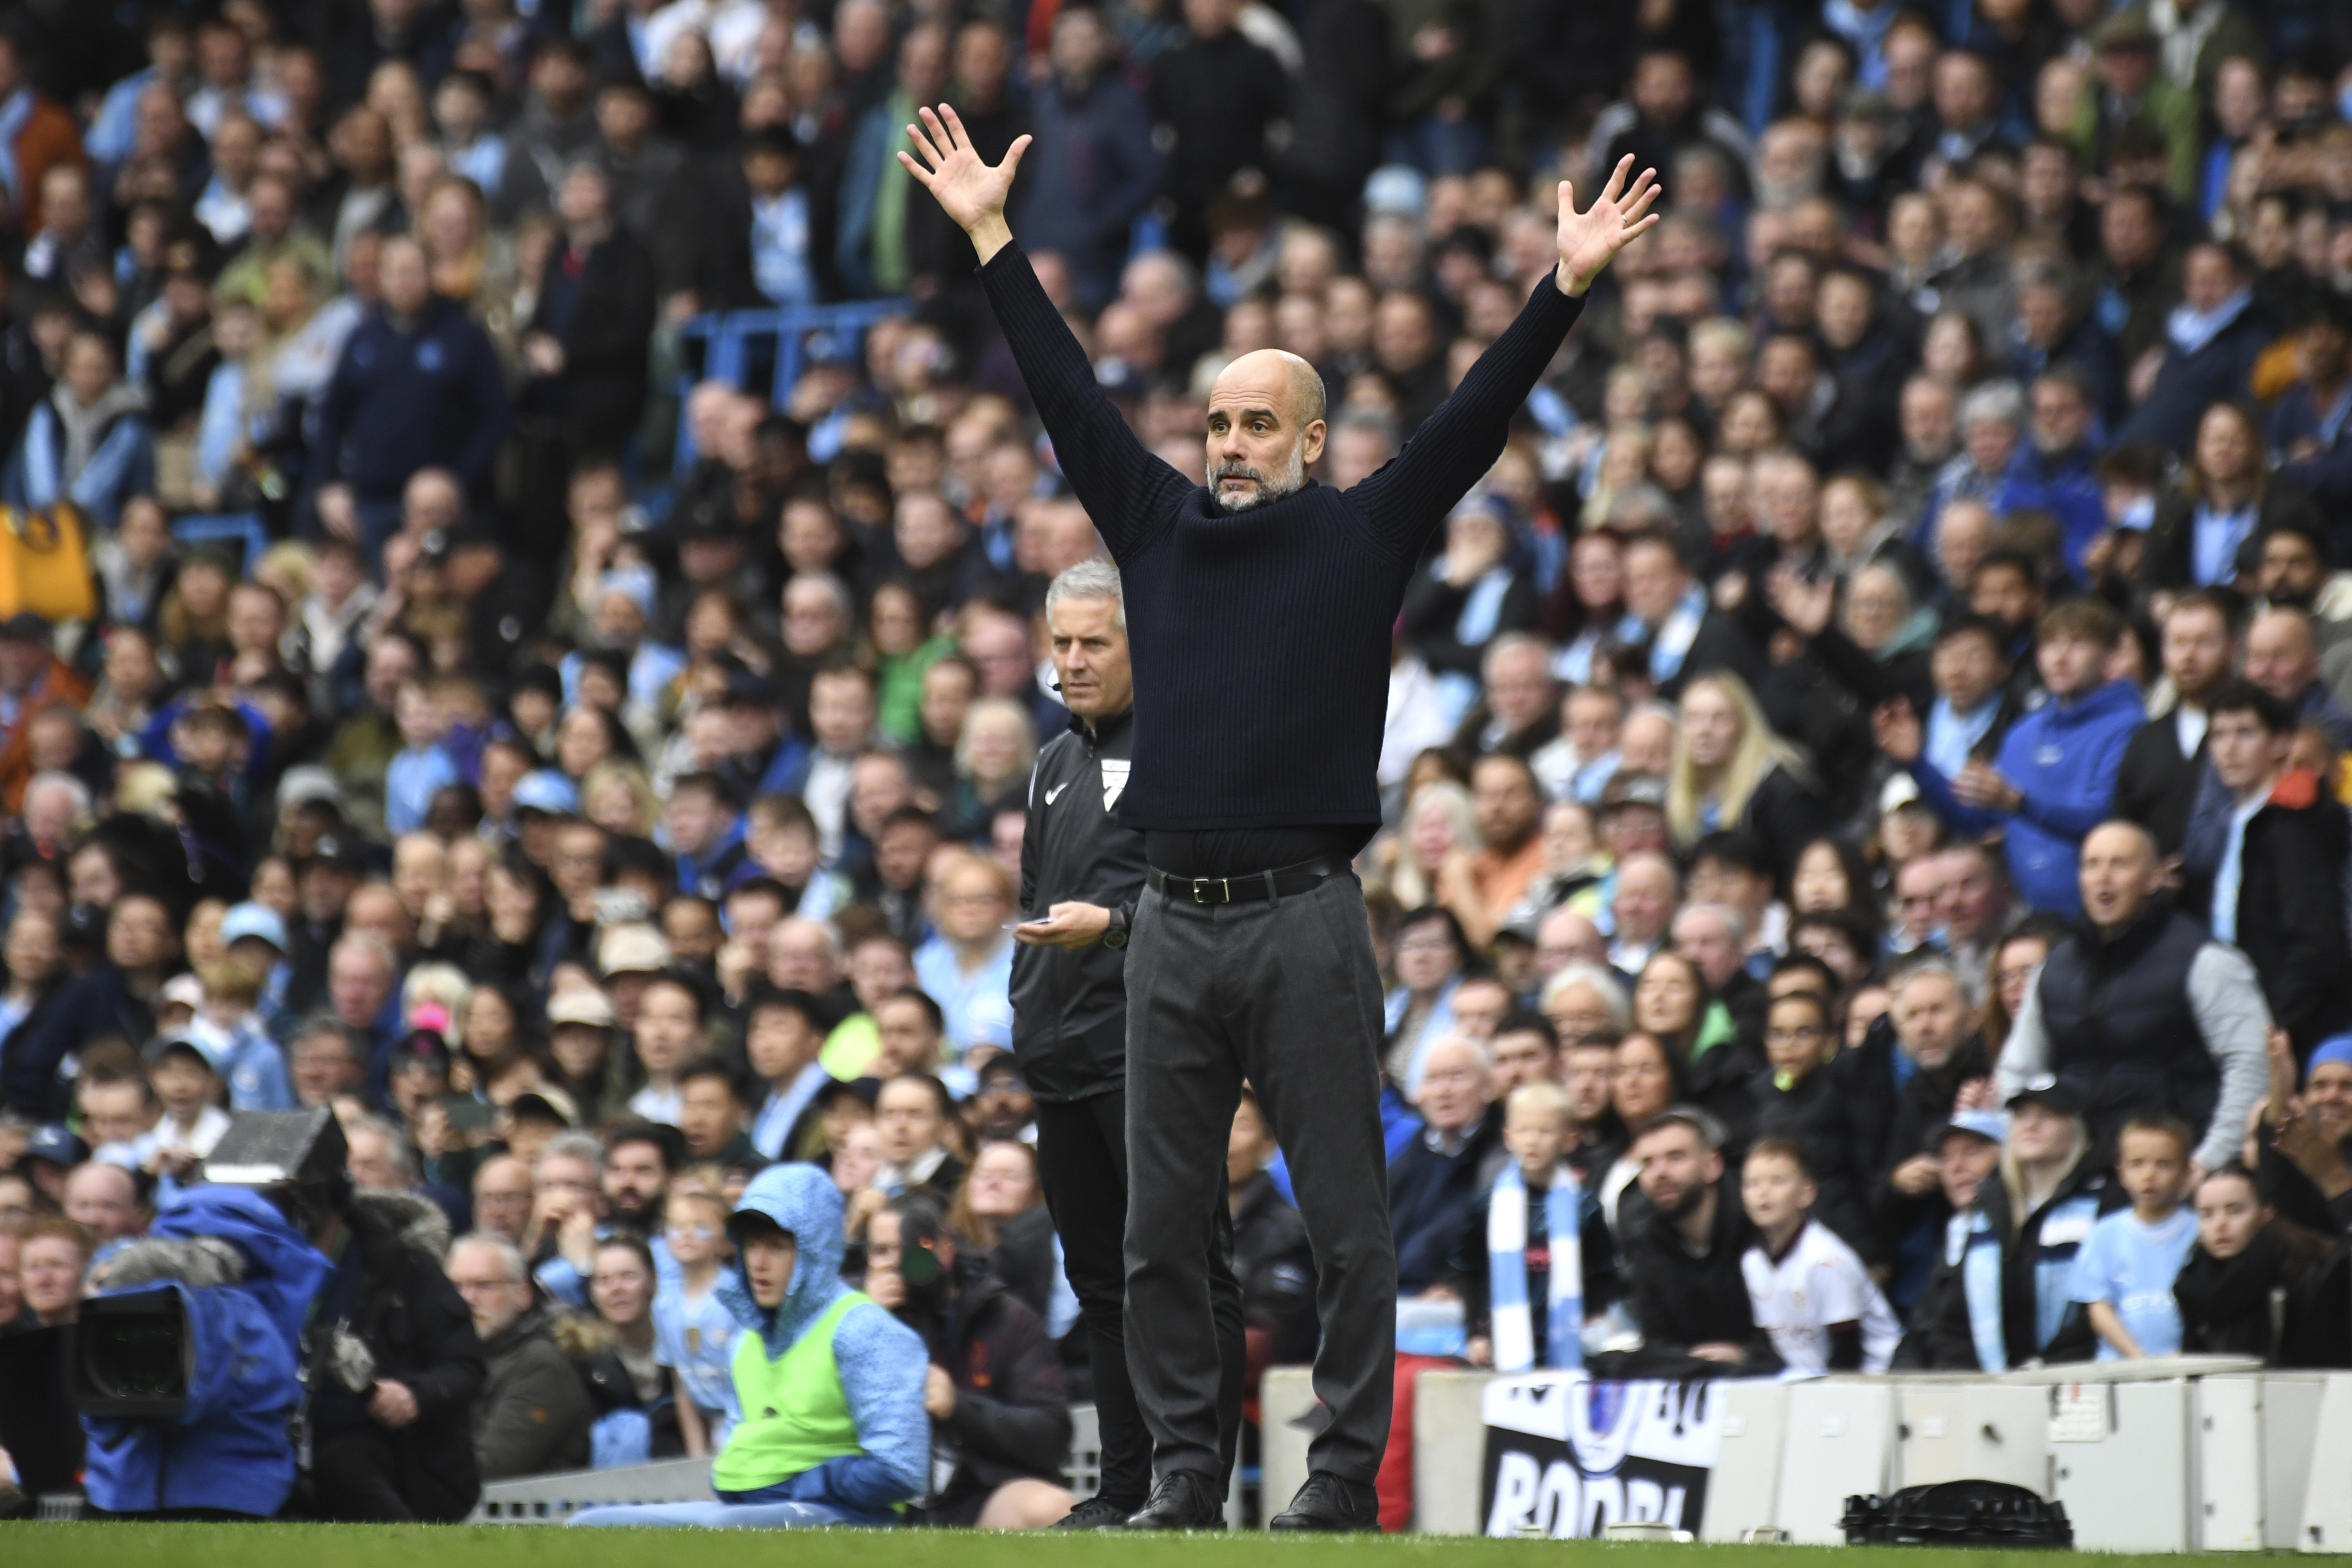 Pep Guardiola's Manchester City are now leading the way in the title race